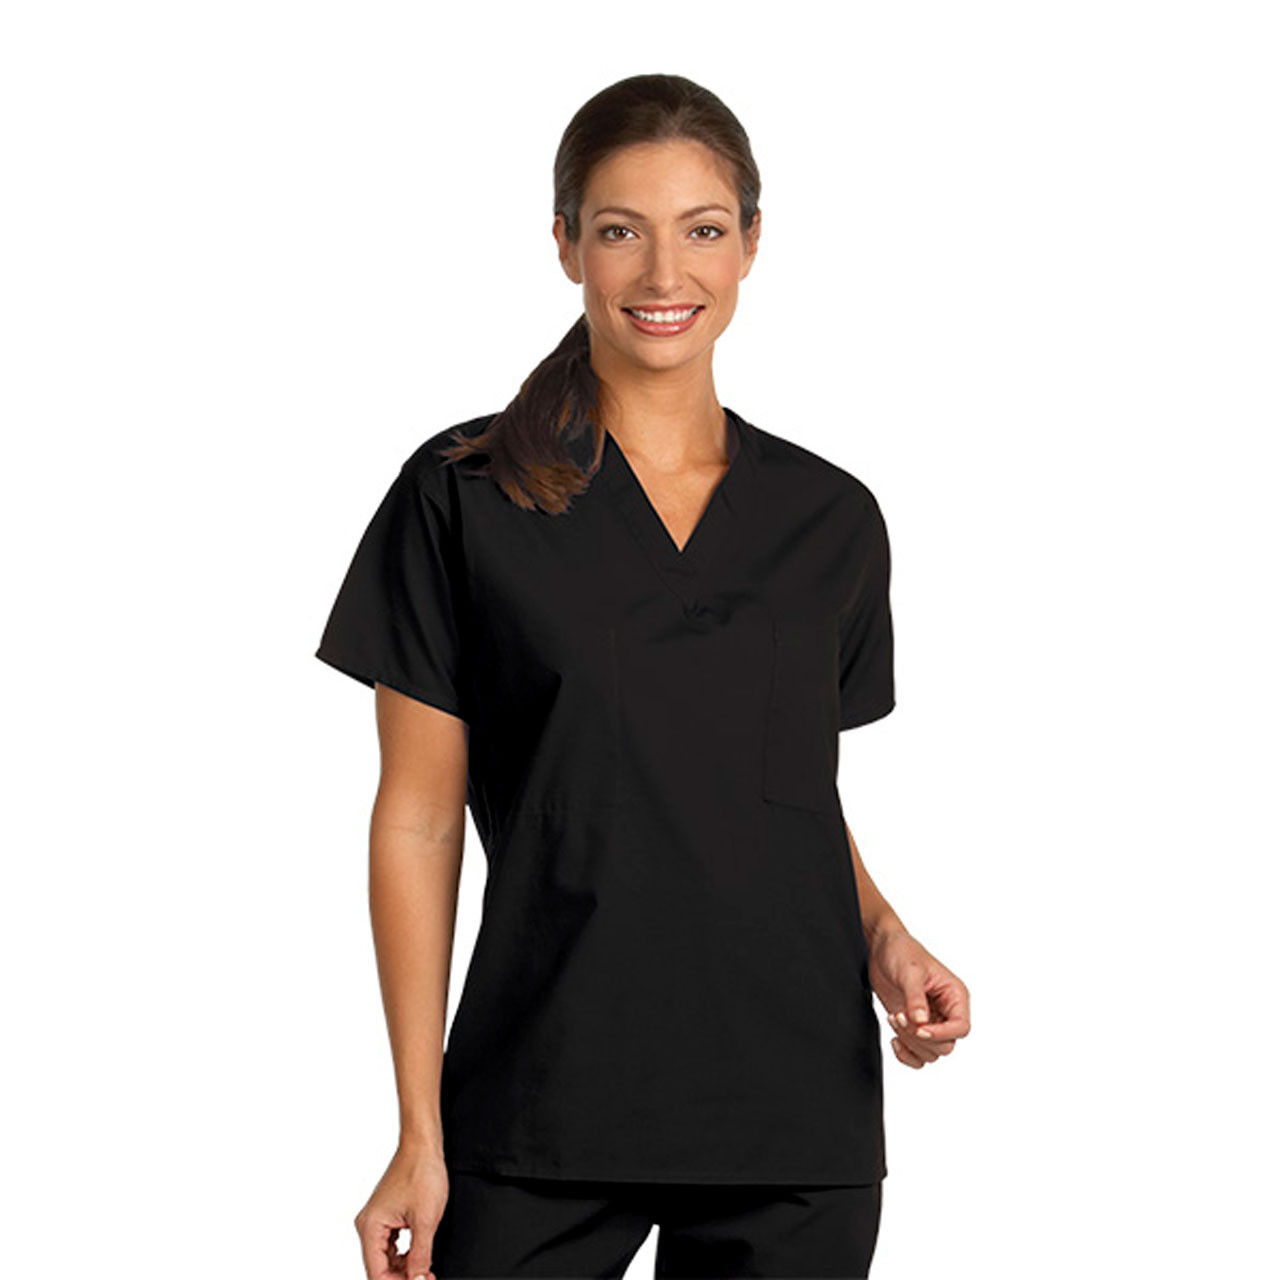 What features do Fashion Seal Scrubs bottoms have?